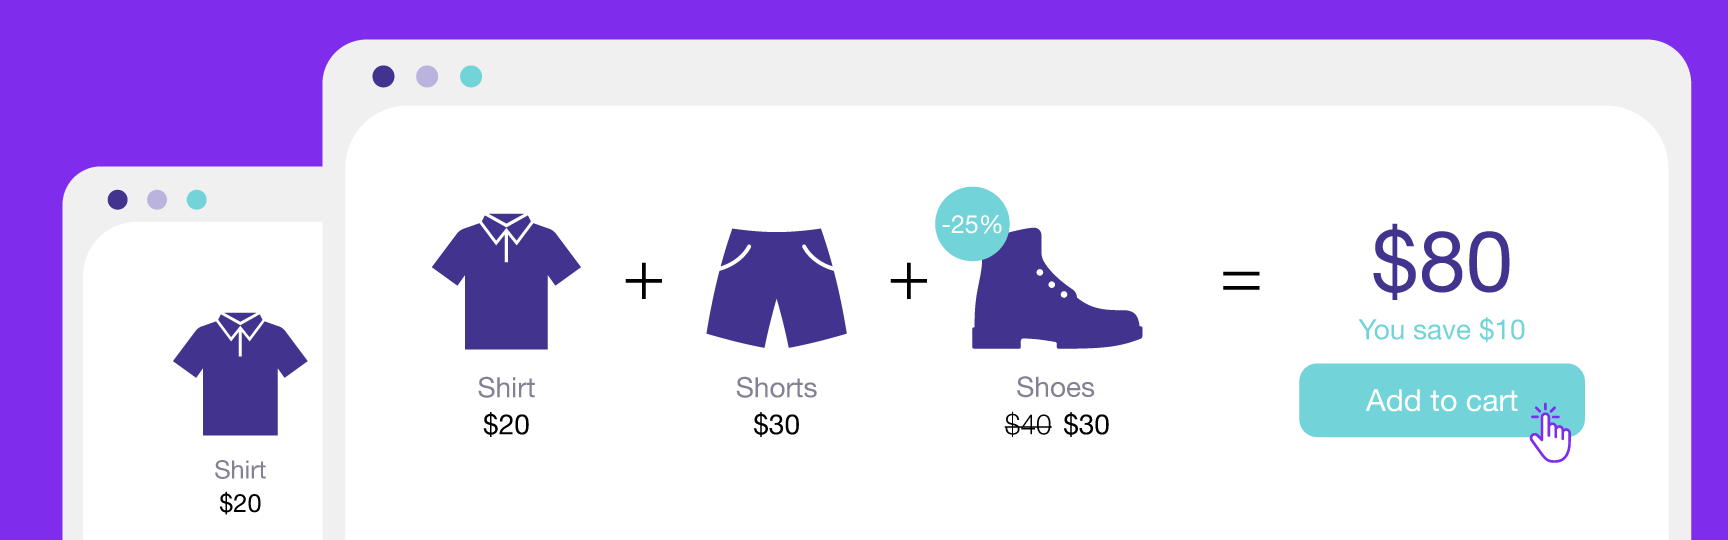 Illustration of the frequently bought together bundles in WooCommerce